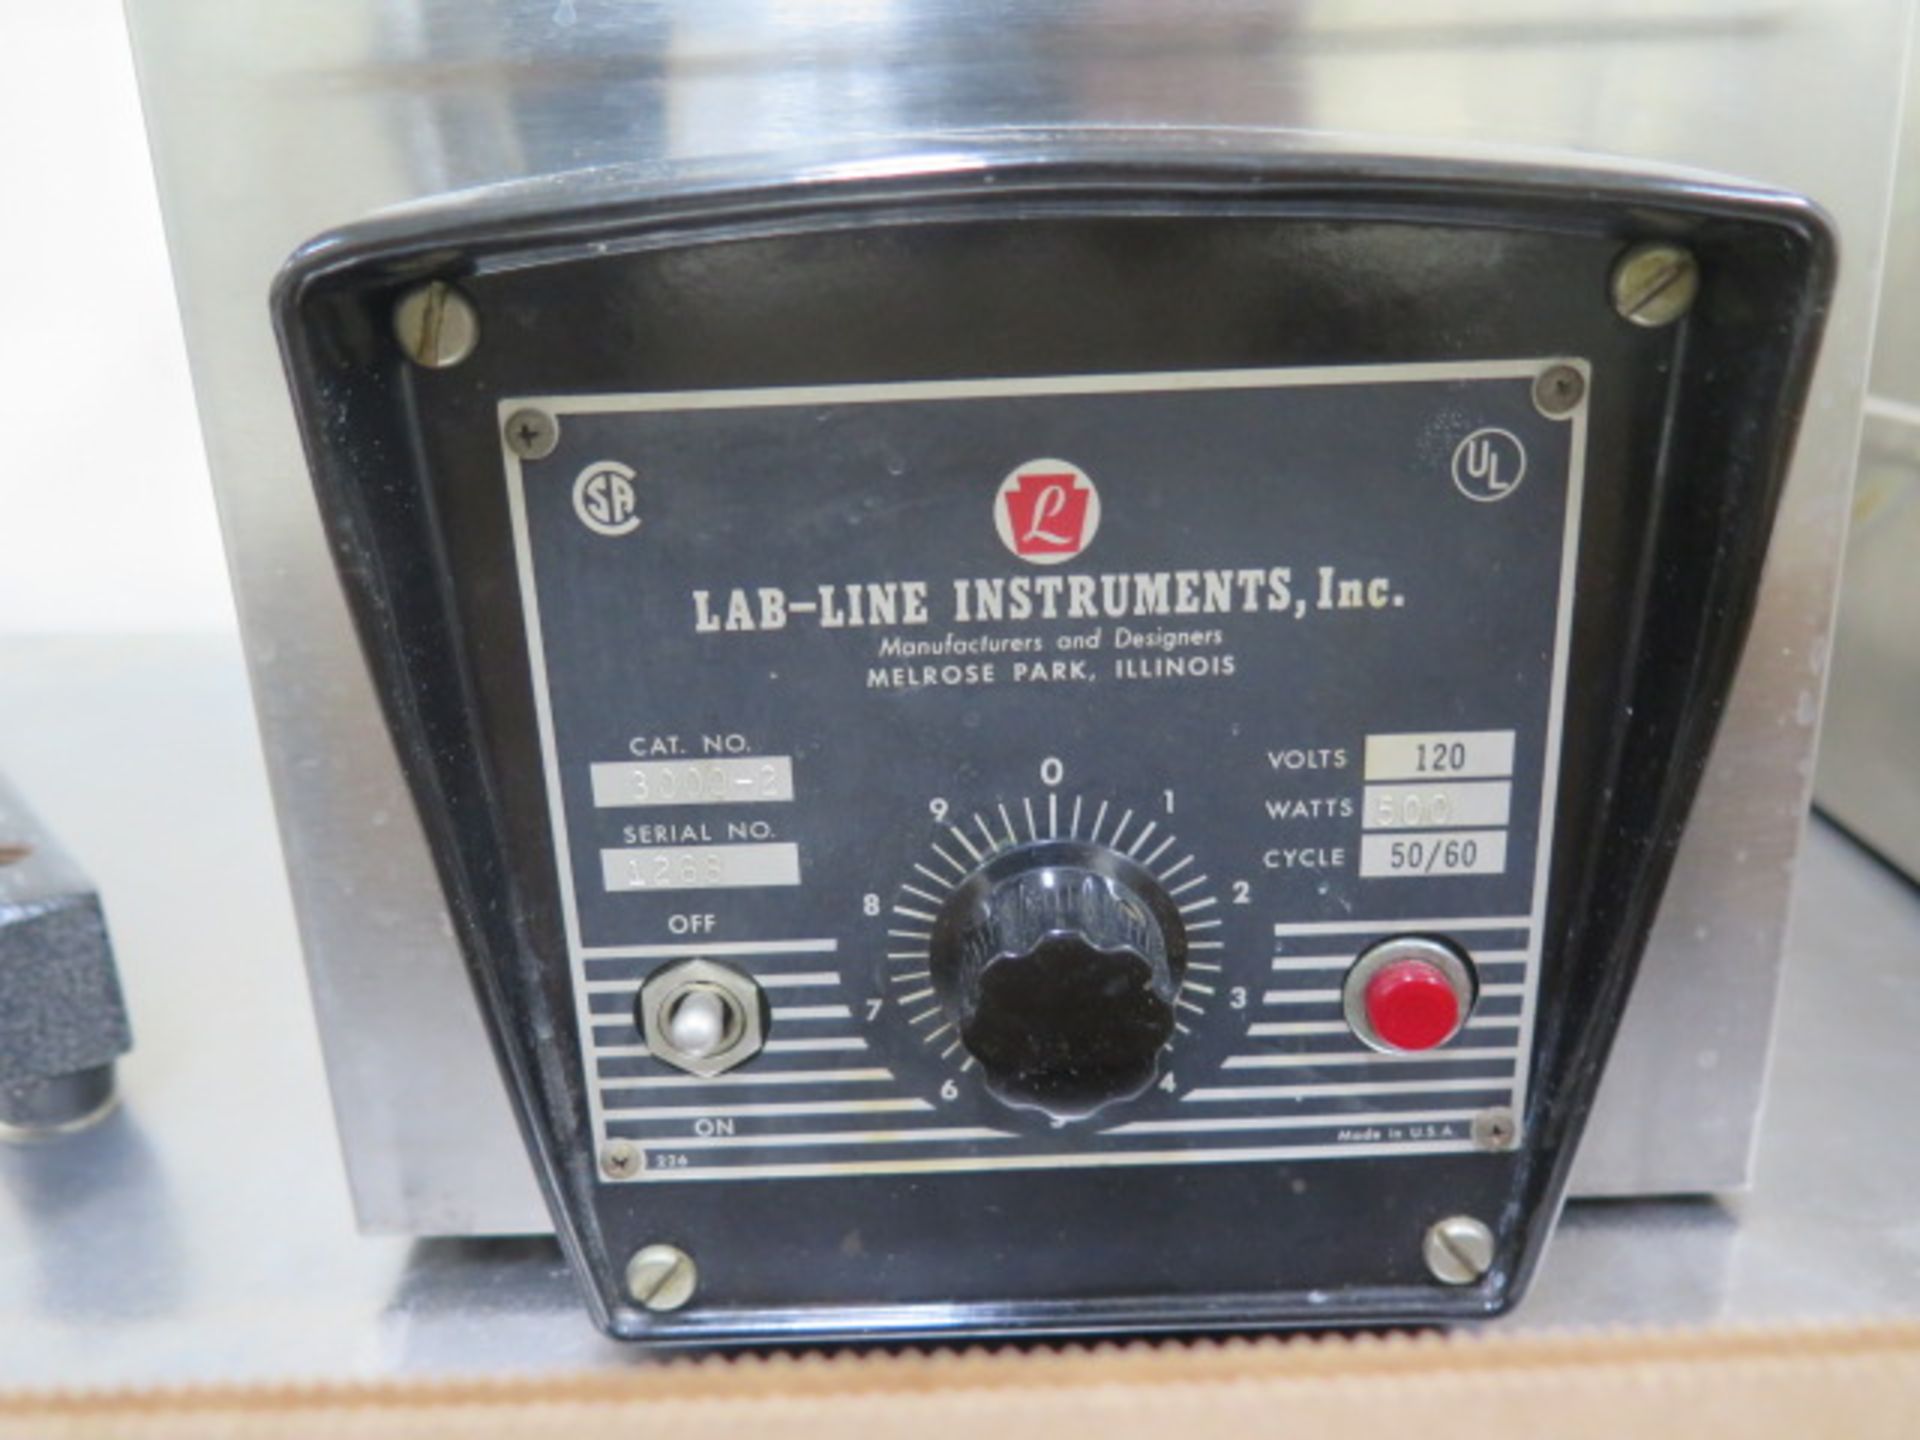 Lab-Line mdl. 3000-2 Heated Bath s/n 1268 (SOLD AS-IS - NO WARRANTY) - Image 4 of 4